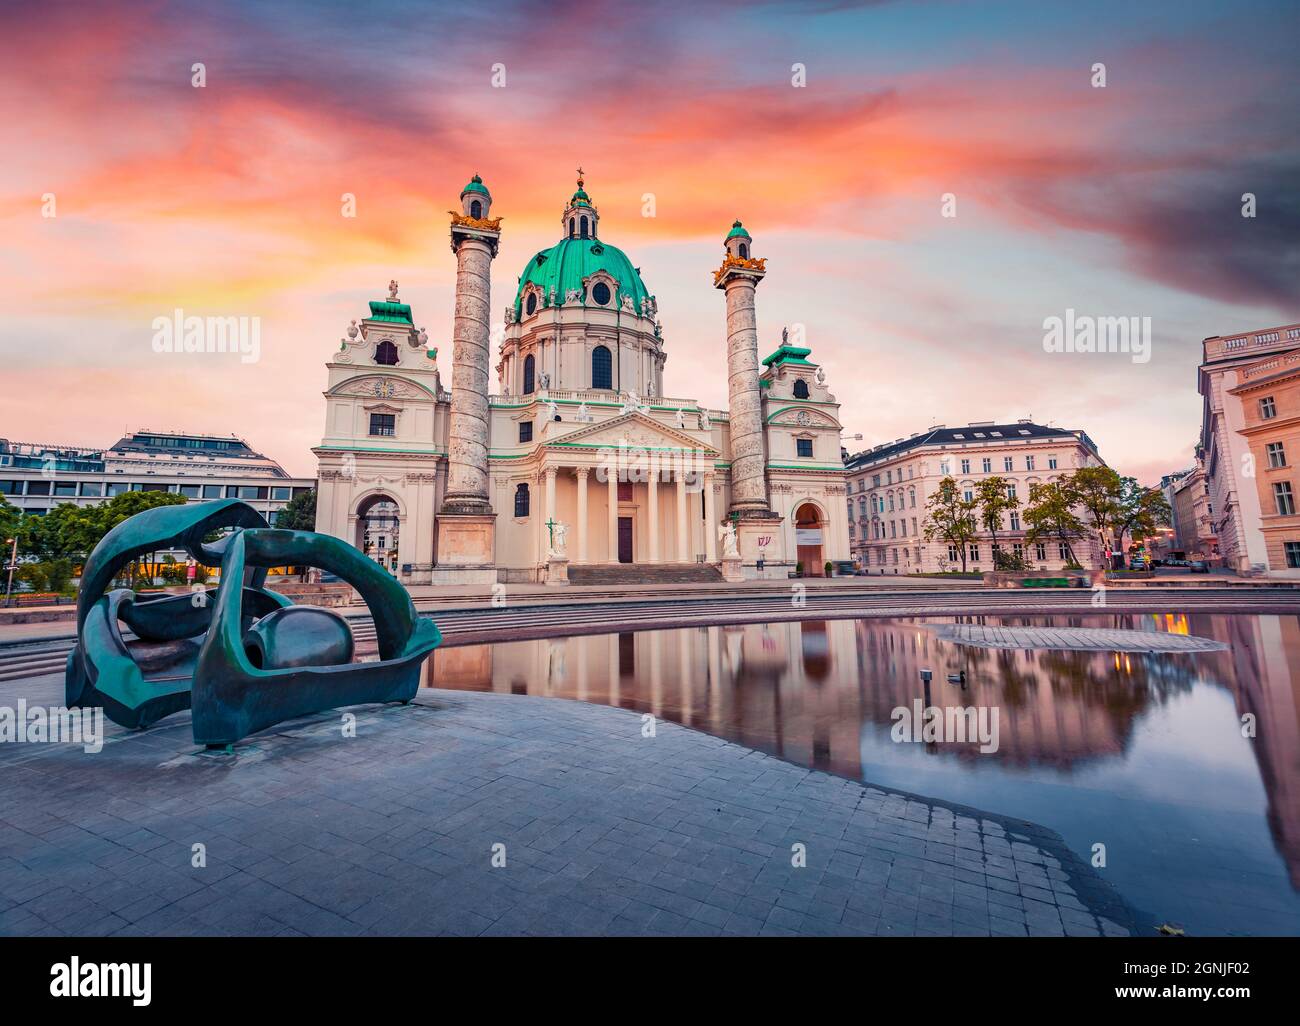 Fantastic spring view of baroque church Karlskirche (St. Charles's Church), the most outstanding baroque church in Vienna. Picturesque sunrise on capi Stock Photo